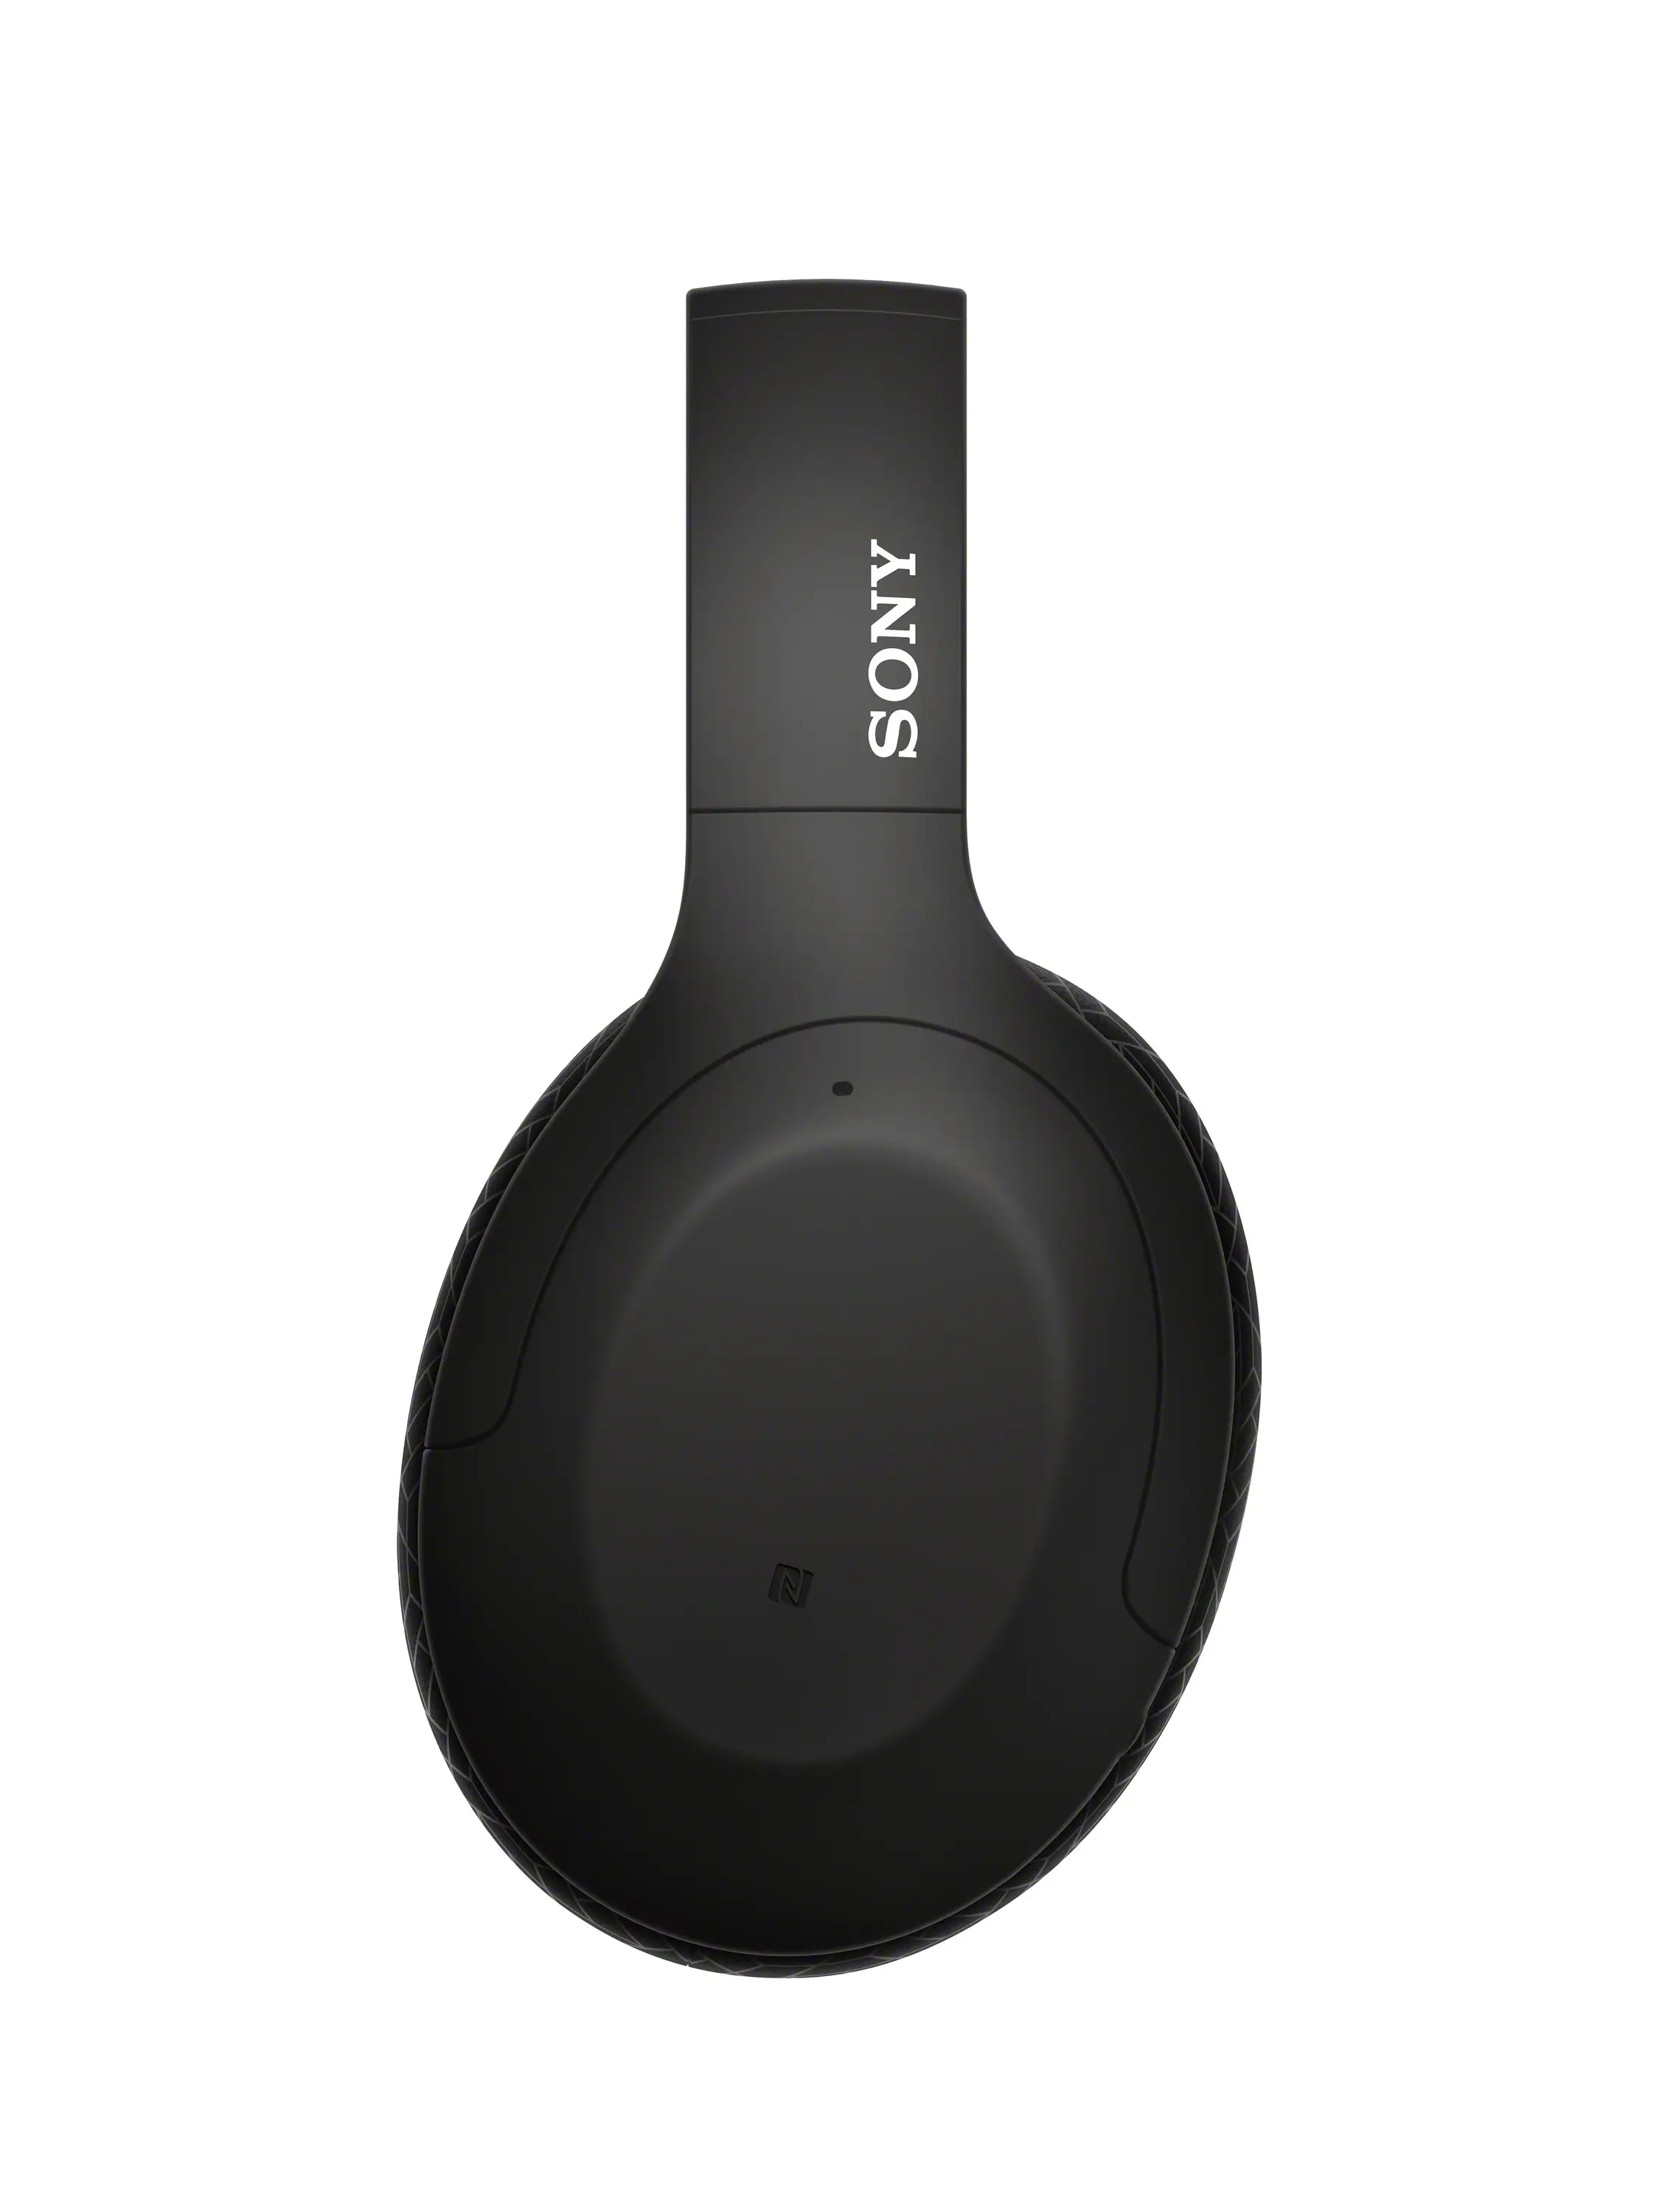 Sony WH-H910N Wireless Noise Cancelling Headphones | Smart Home Sounds